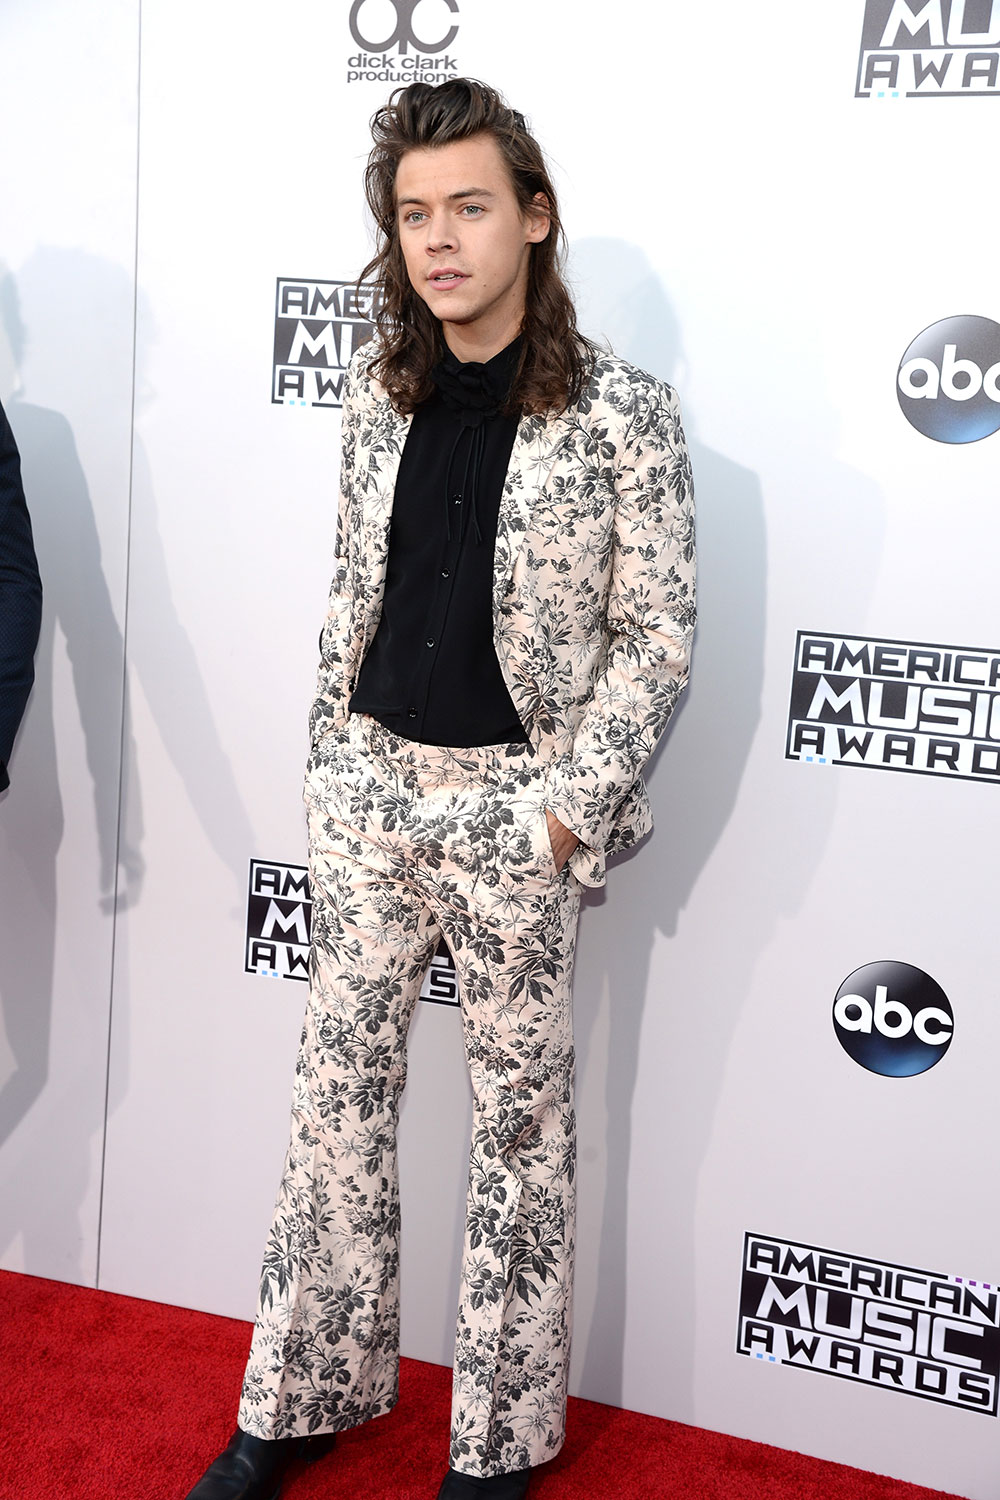 Harry Styles takes things in a different direction with a floral print Gucci suit.